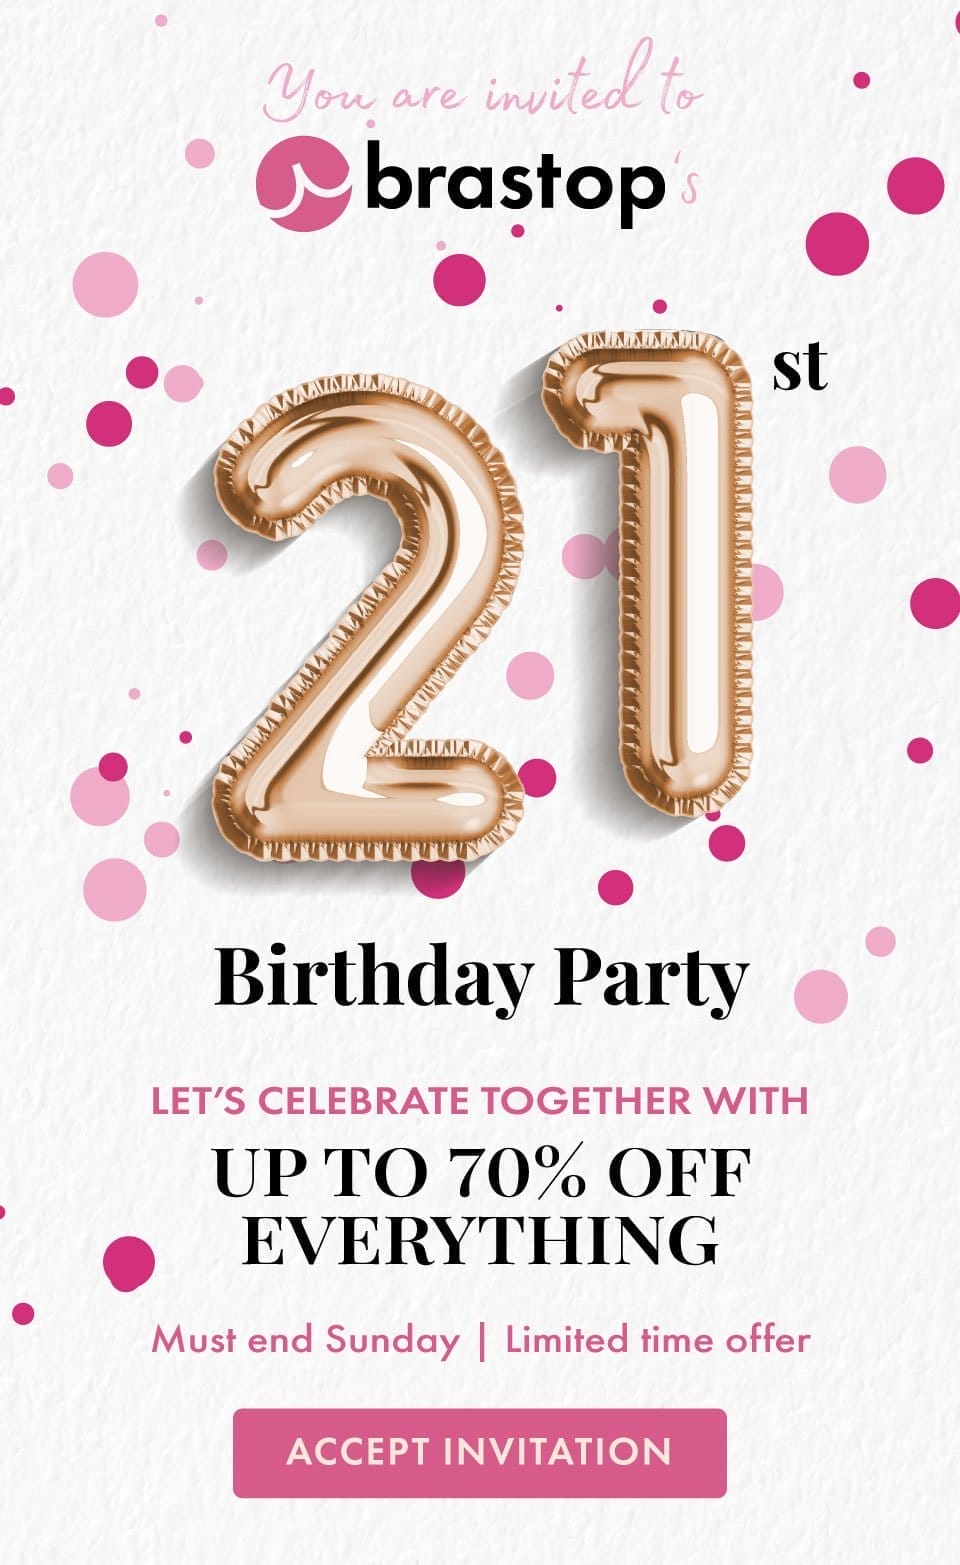 Brastop's 21st Birthday - up to 70% off everything, must end Sunday!